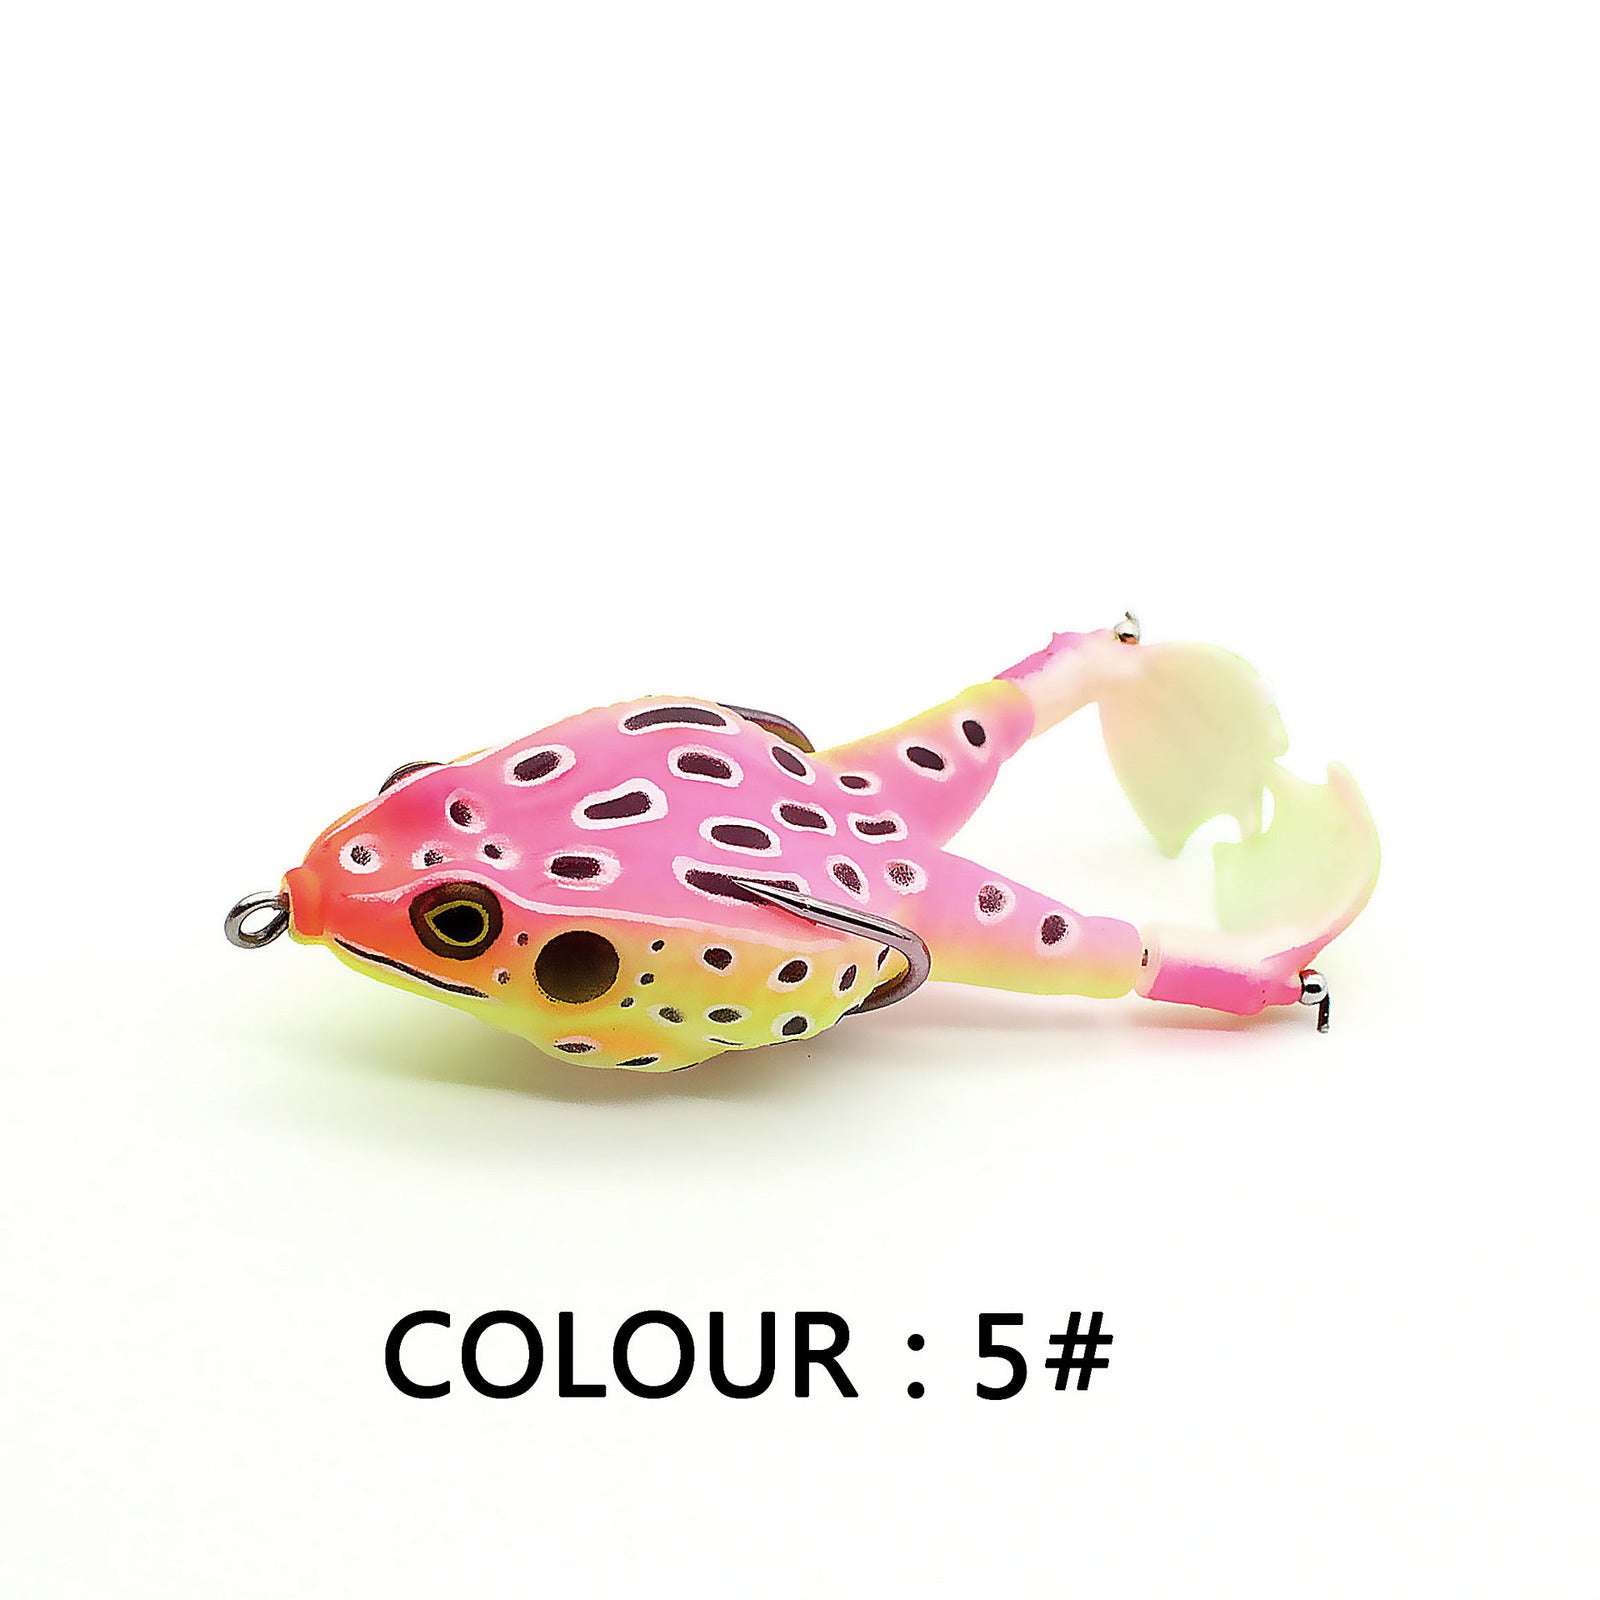 Buy Fishing Frog/Sparkling Fishing Frog with LOT of Silicon